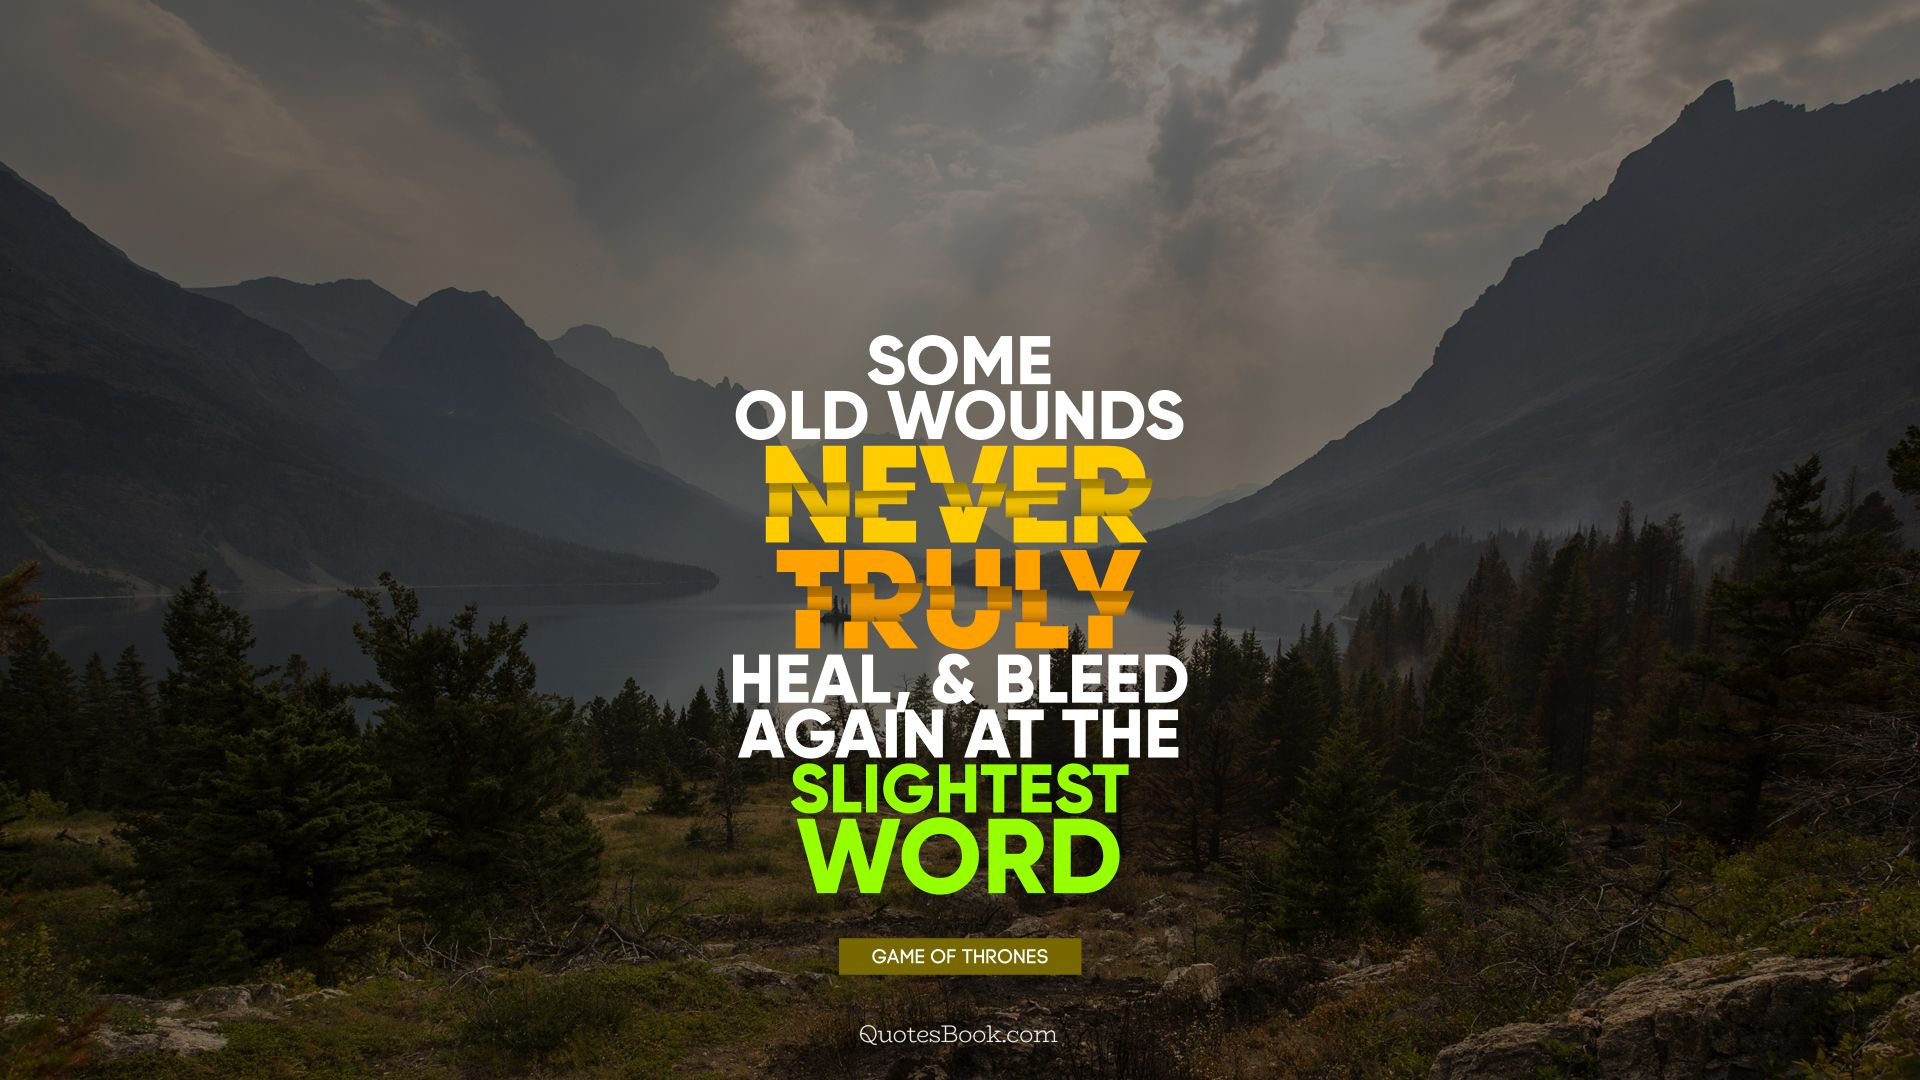 Some old wounds never truly heal, and bleed again at the slightest word. - Quote by George R.R. Martin